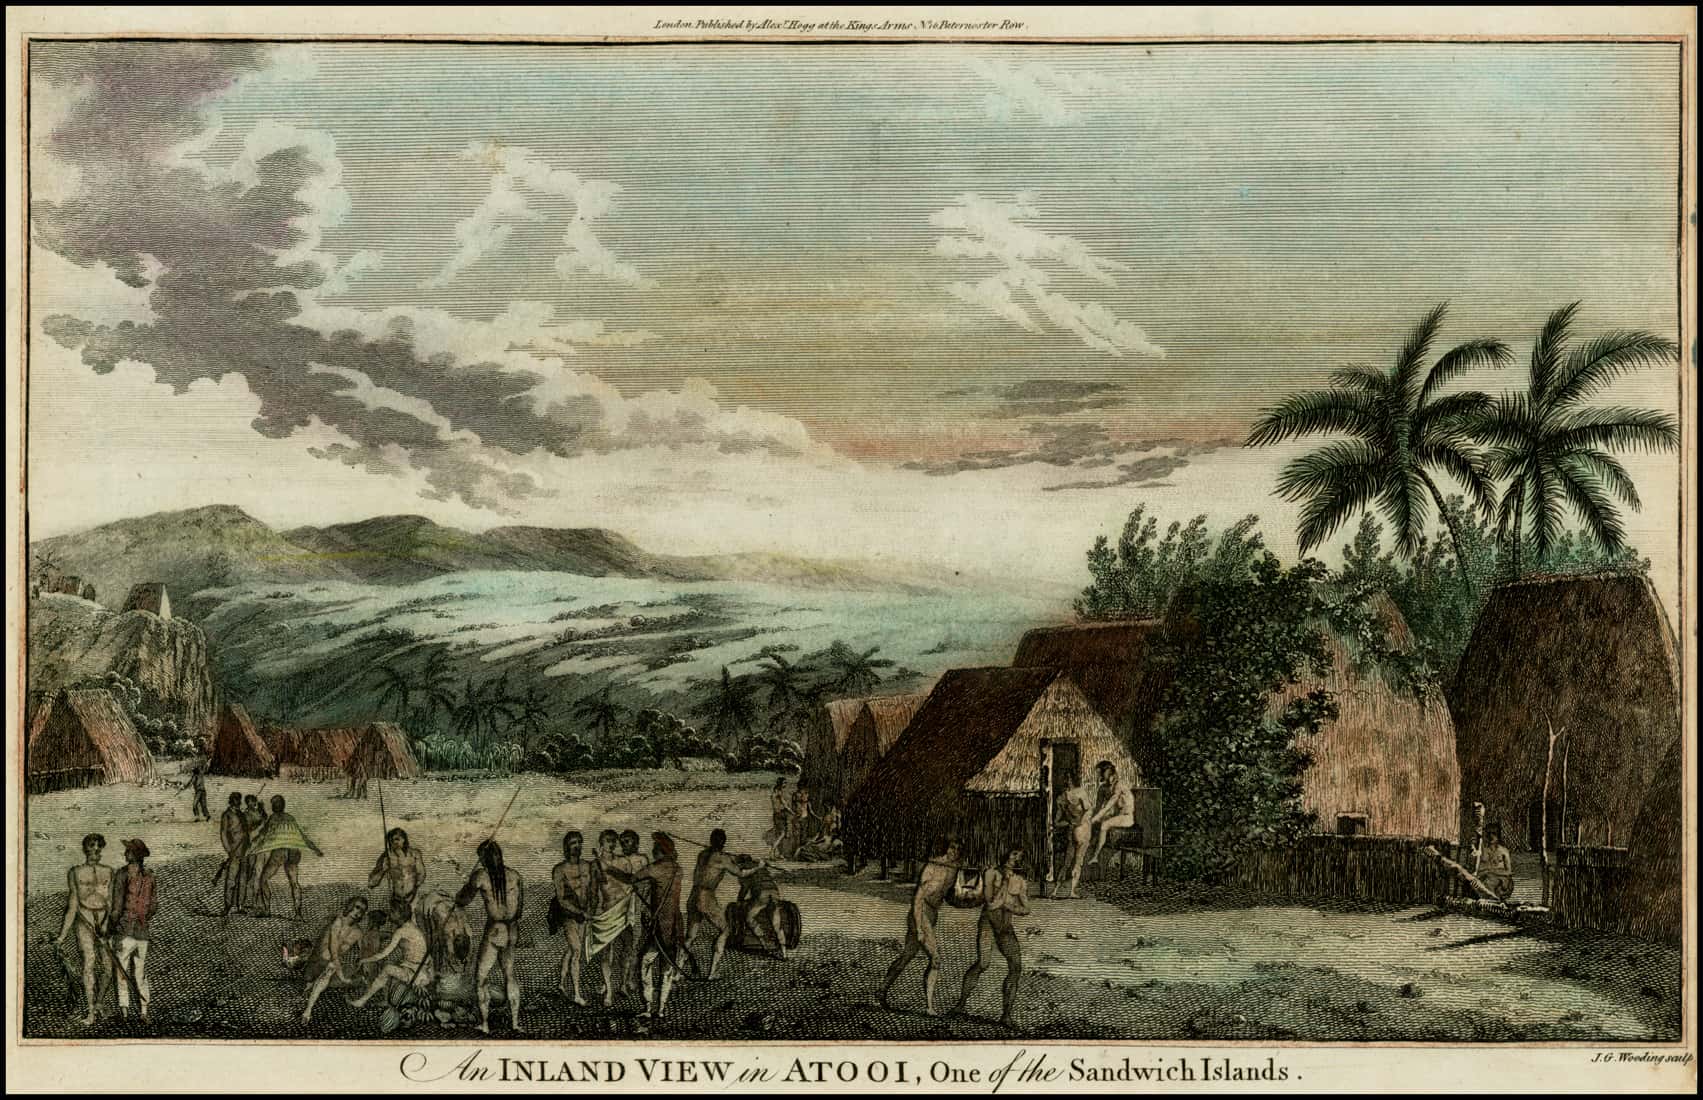 <p>Before reaching North America, Cook encountered the Hawaiian Islands in 1778. Cook is thought to be the first European to make formal contact with the people of the archipelago. In his notes, Cook named Hawaii the Sandwich Islands, in honor of his patron the Earl of Sandwich. After his work along the West Coast of North America was completed, Cook made what turned out to be a fateful decision to return to the so-called Sandwich Islands.</p>